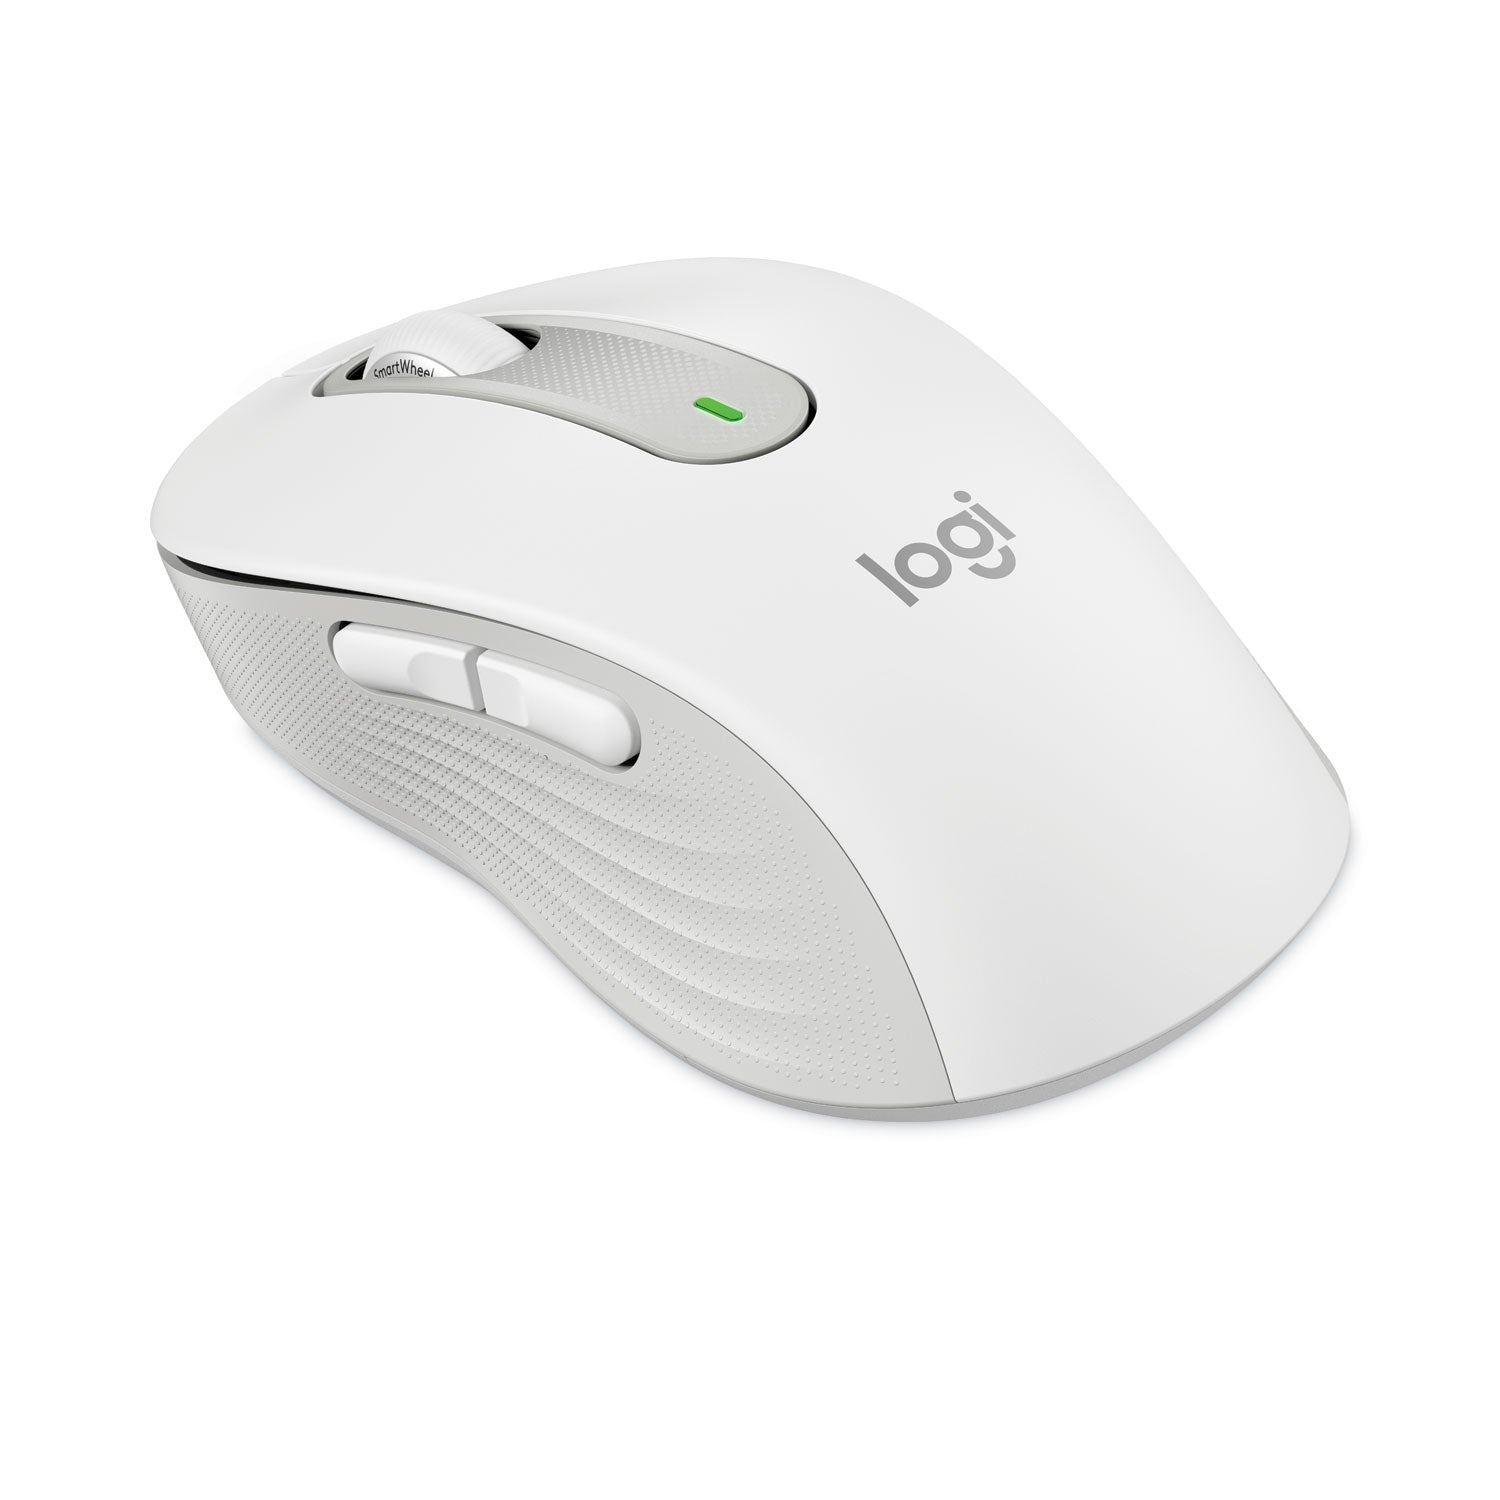 signature-m650-for-business-wireless-mouse-large-24-ghz-frequency-33-ft-wireless-range-right-hand-use-off-white_log910006347 - 2